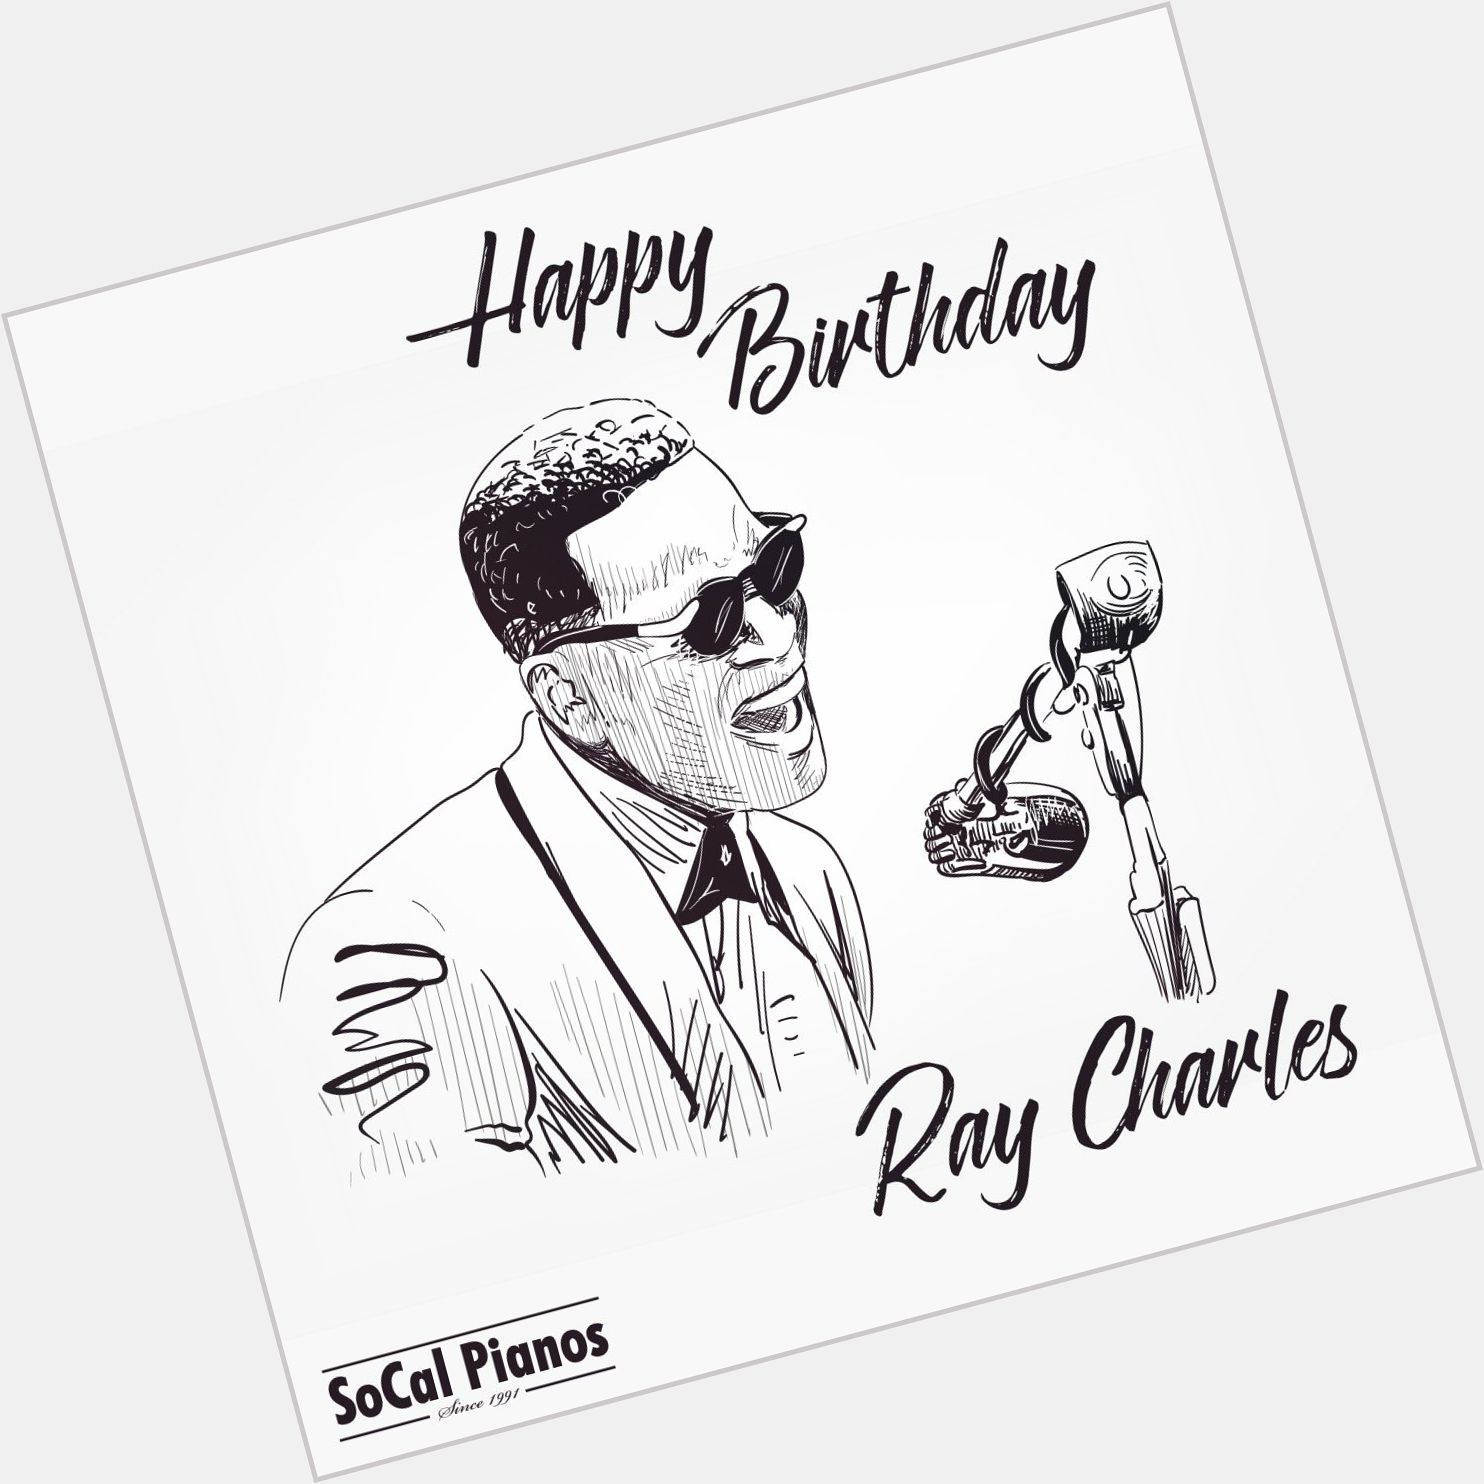 Happy Birthday to the late, great, Ray Charles! One of the best to ever do it. 